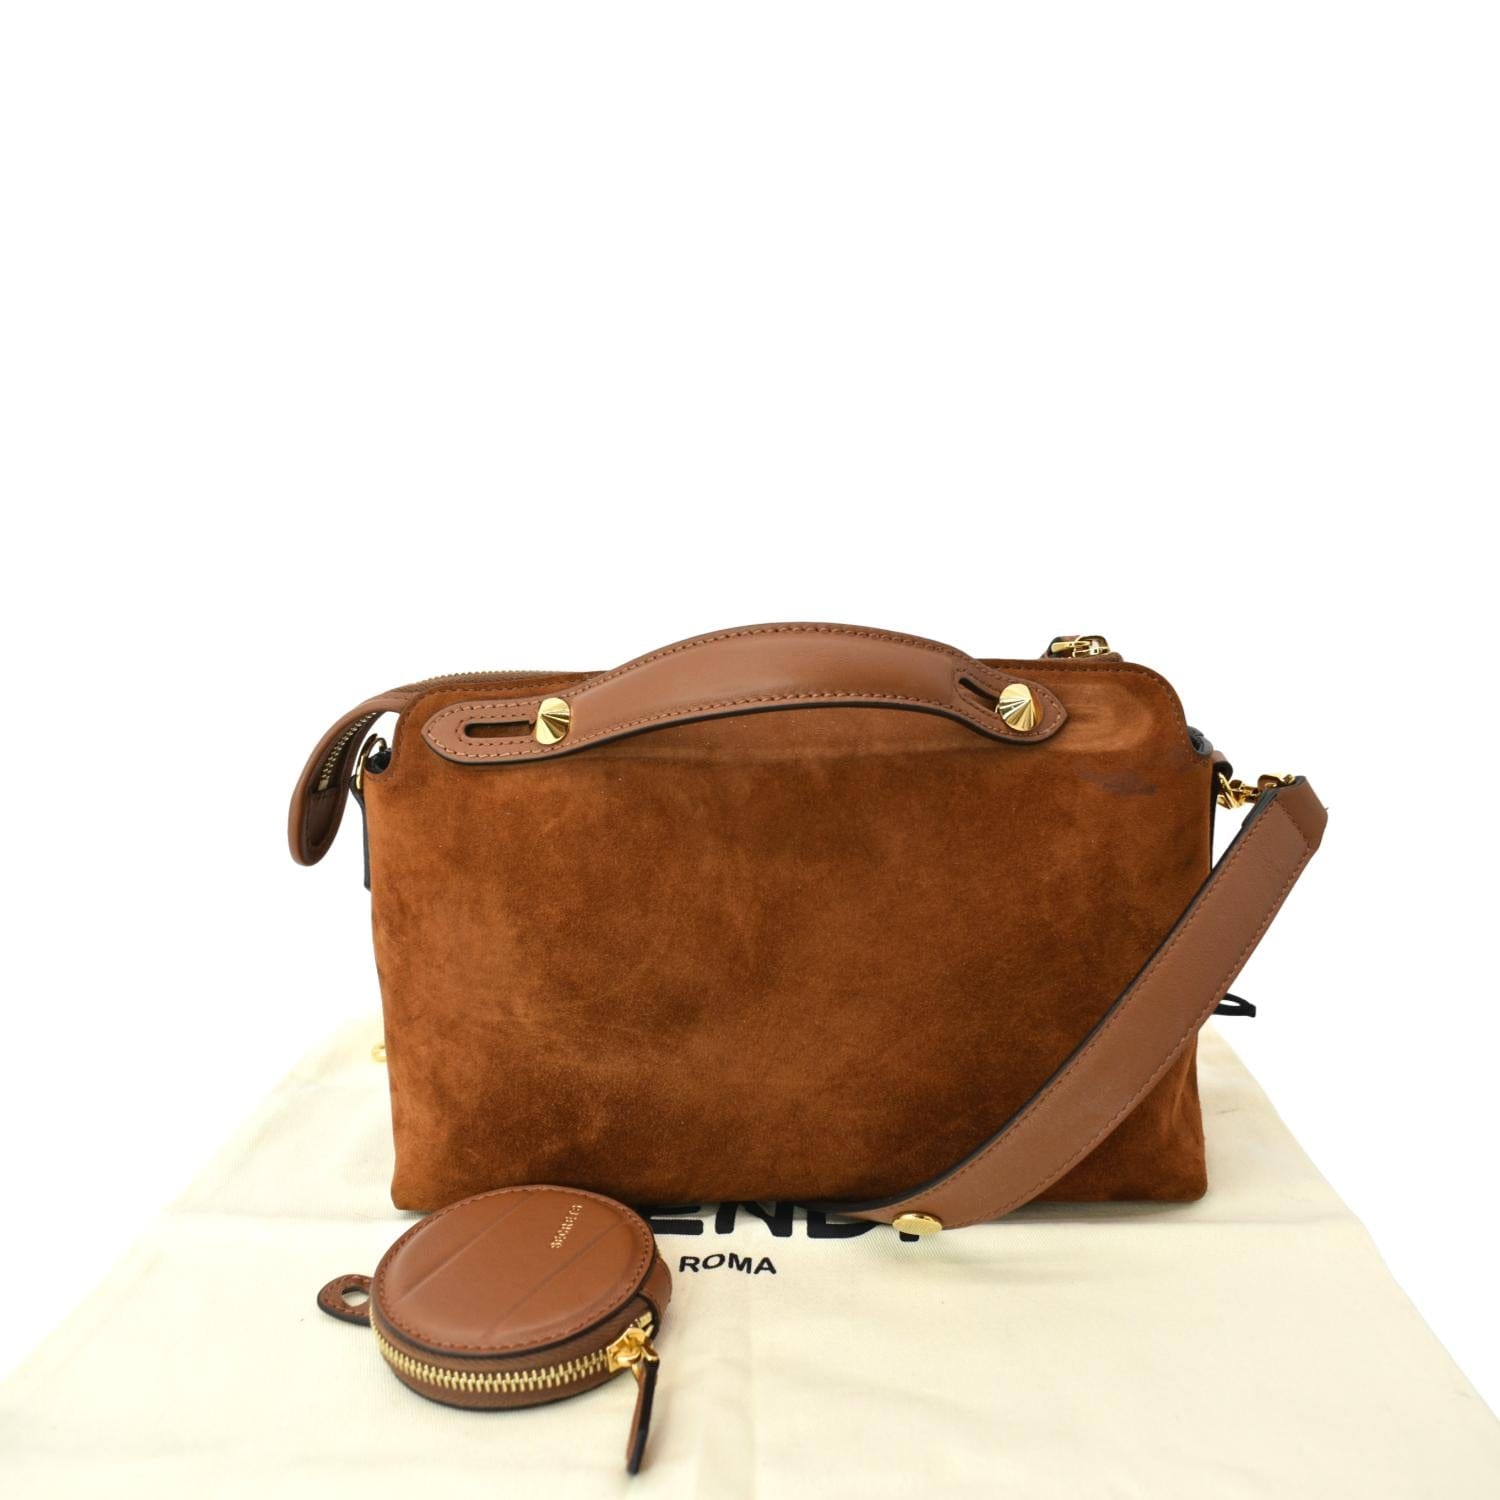 By The Way Medium - Brown leather Boston bag